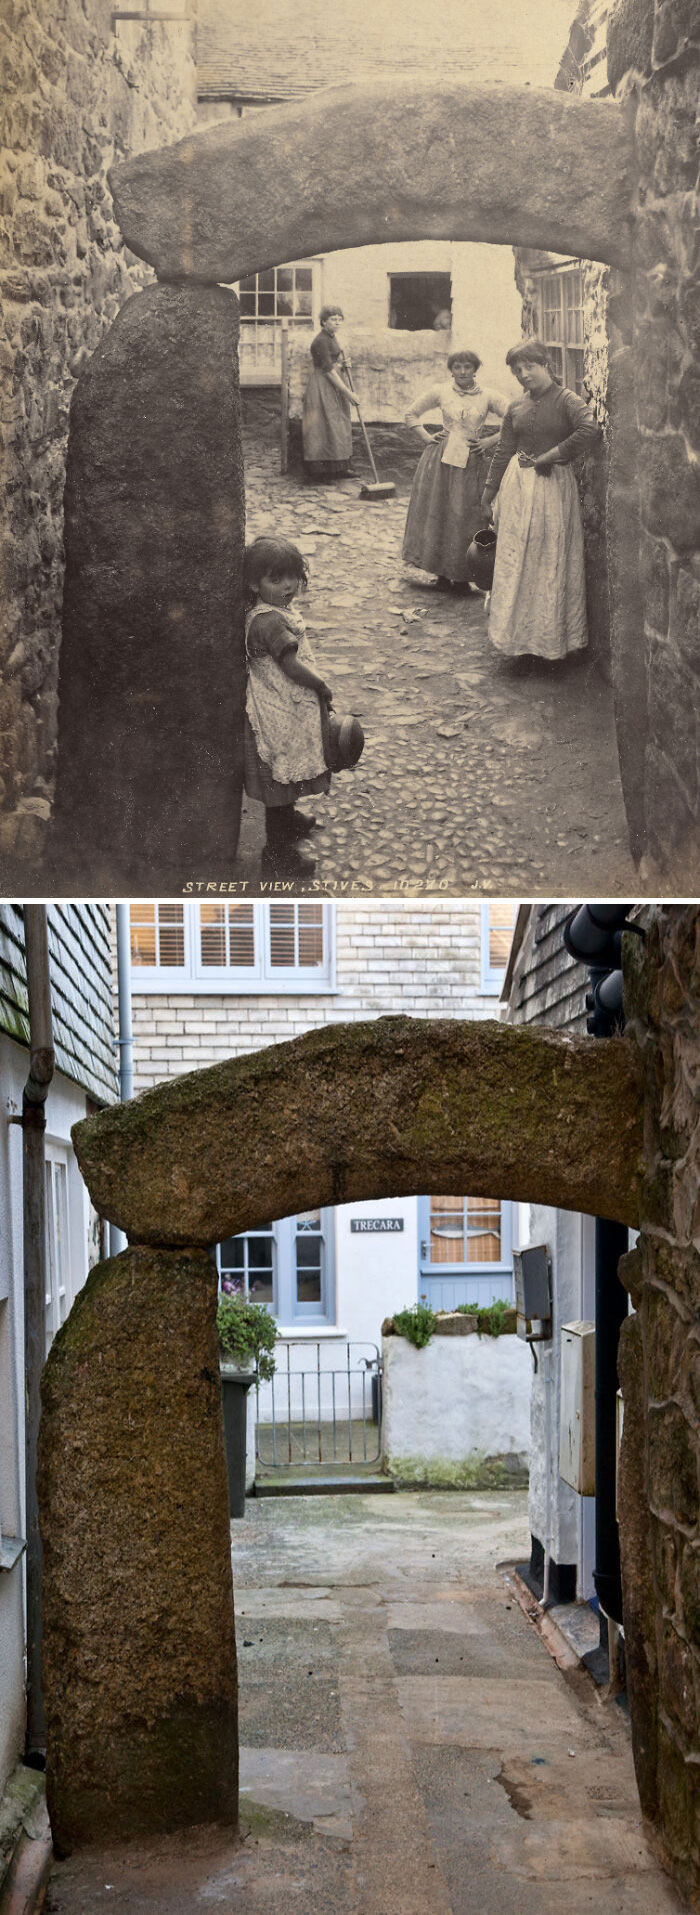 Hick's Court, St Ives, England - 1888 And Today